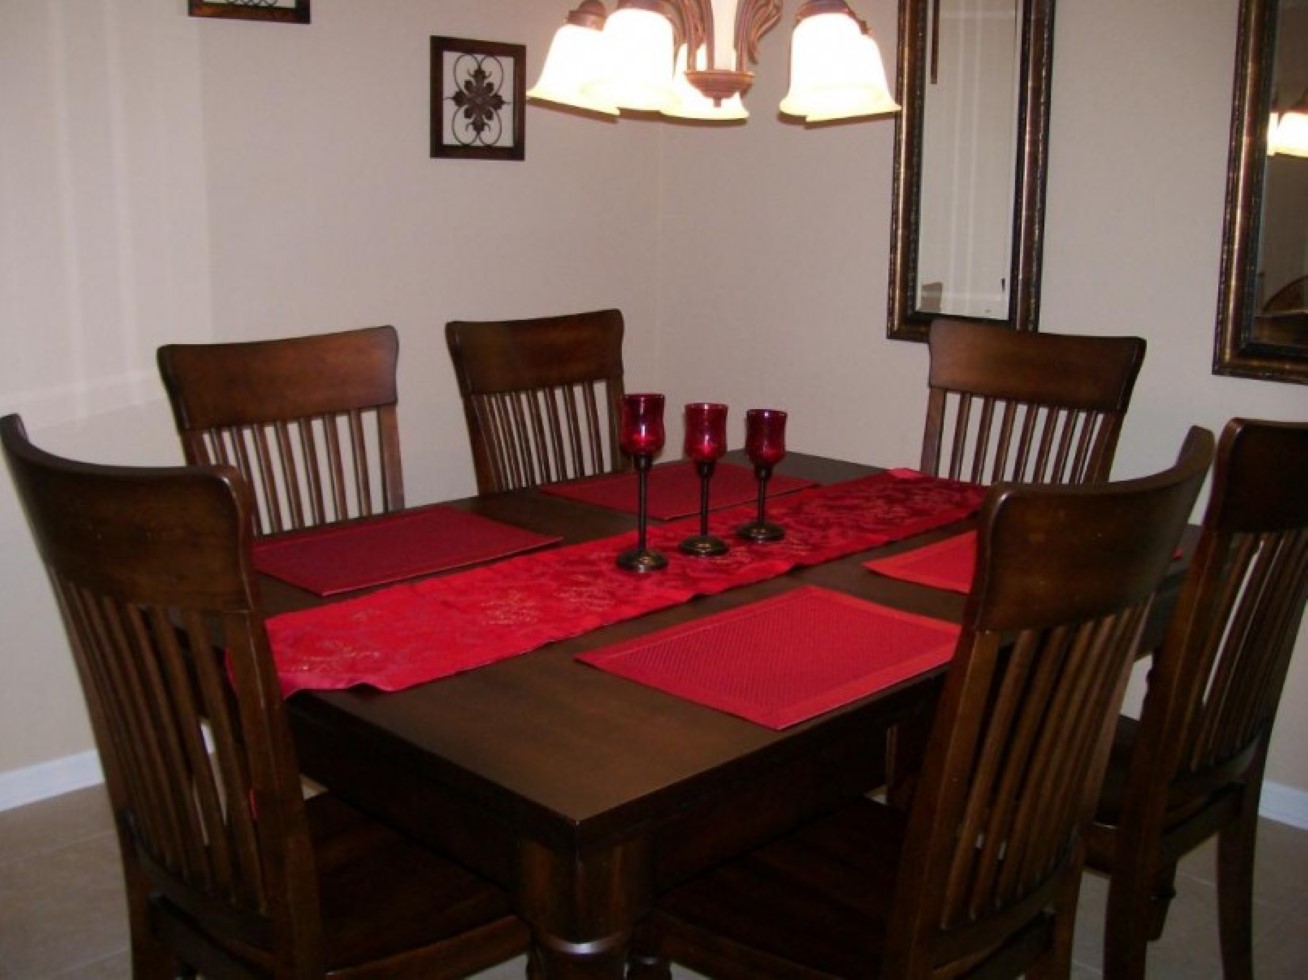 Red Dining Pads Glamorous Red Dining Room Table Pads Feats With Classic Down Light Chandelier And Maroon Candle Pots Dining Room 10 Stylish Dining Table Pads For Your Ultra Home Appearance